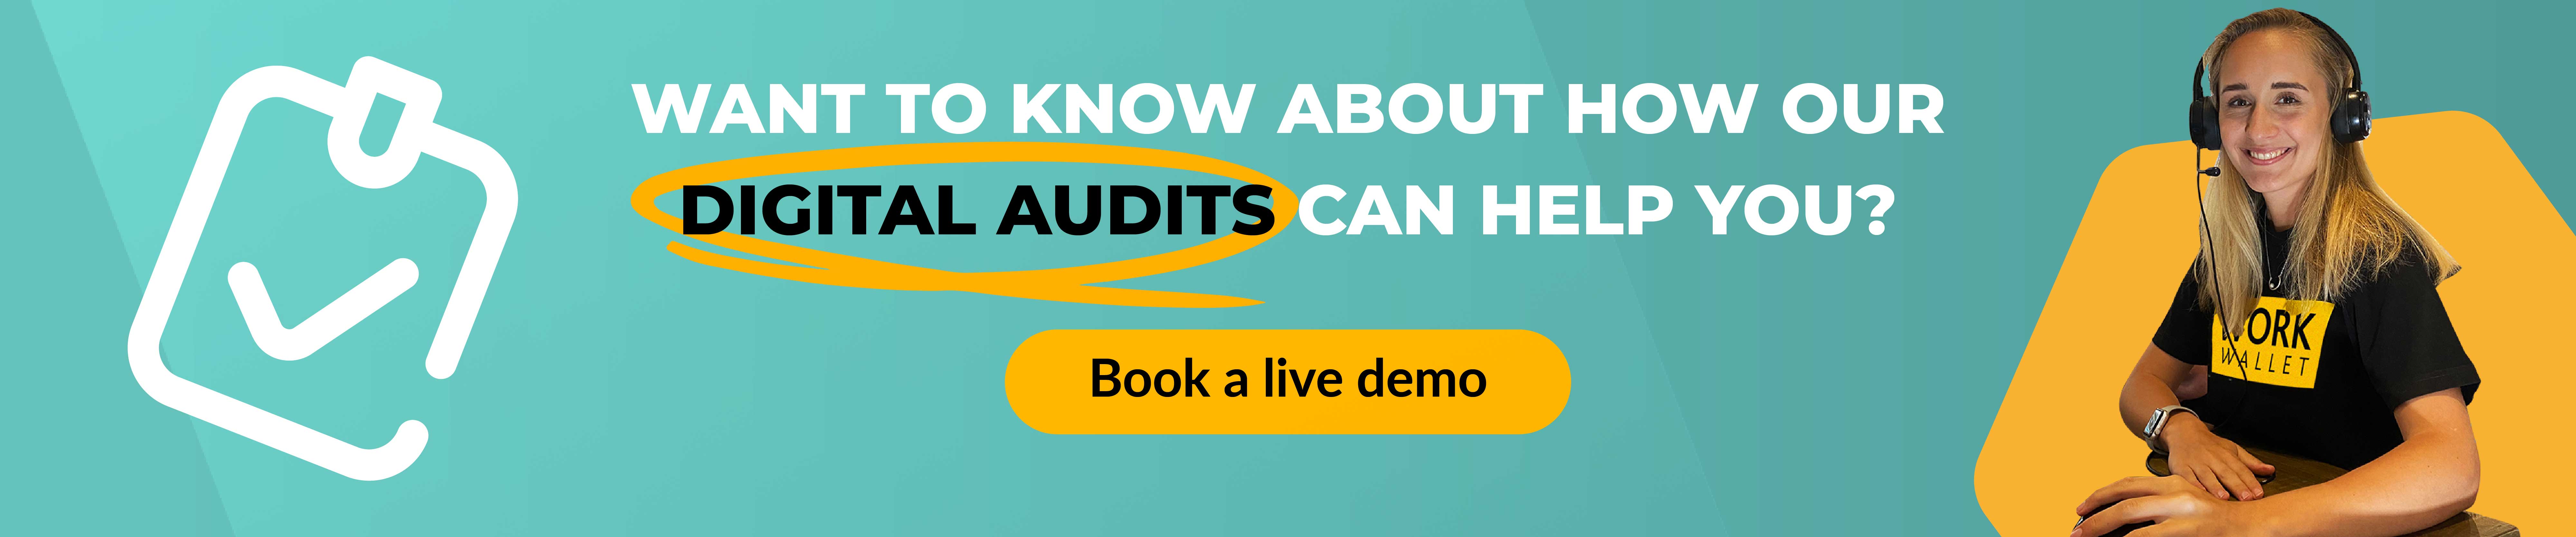 health and safety audit demo link